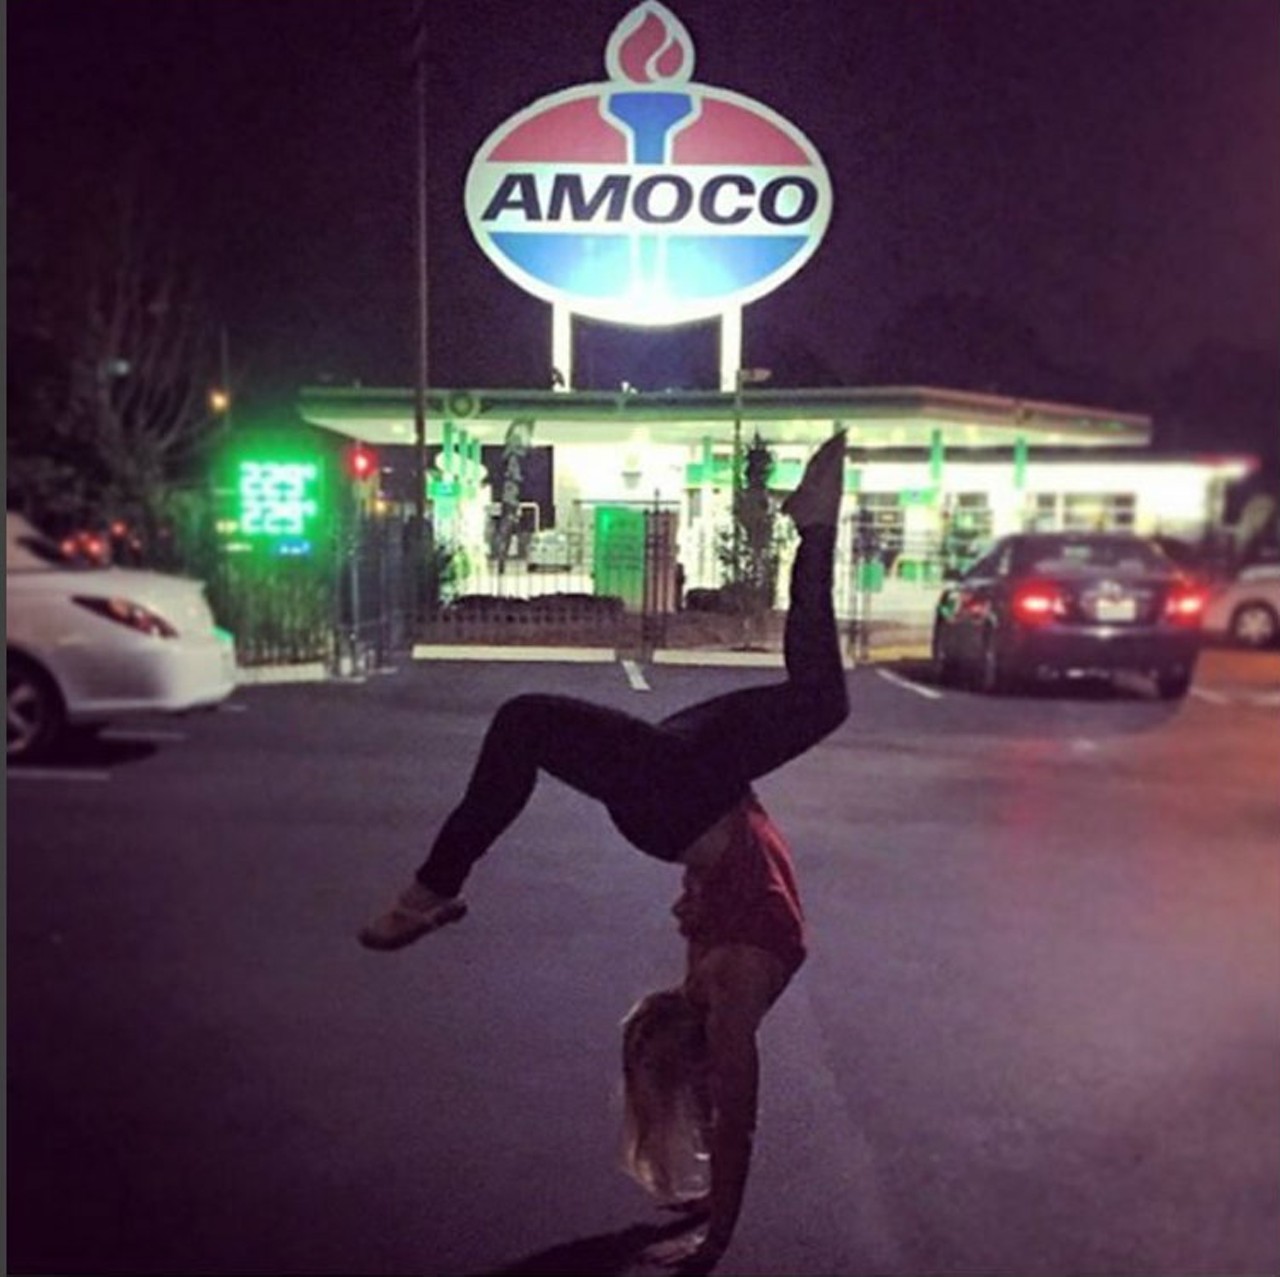 The giant Amoco signBonus points if you can pull off a pose like this. Photo courtesy of Instagram / lharvath.